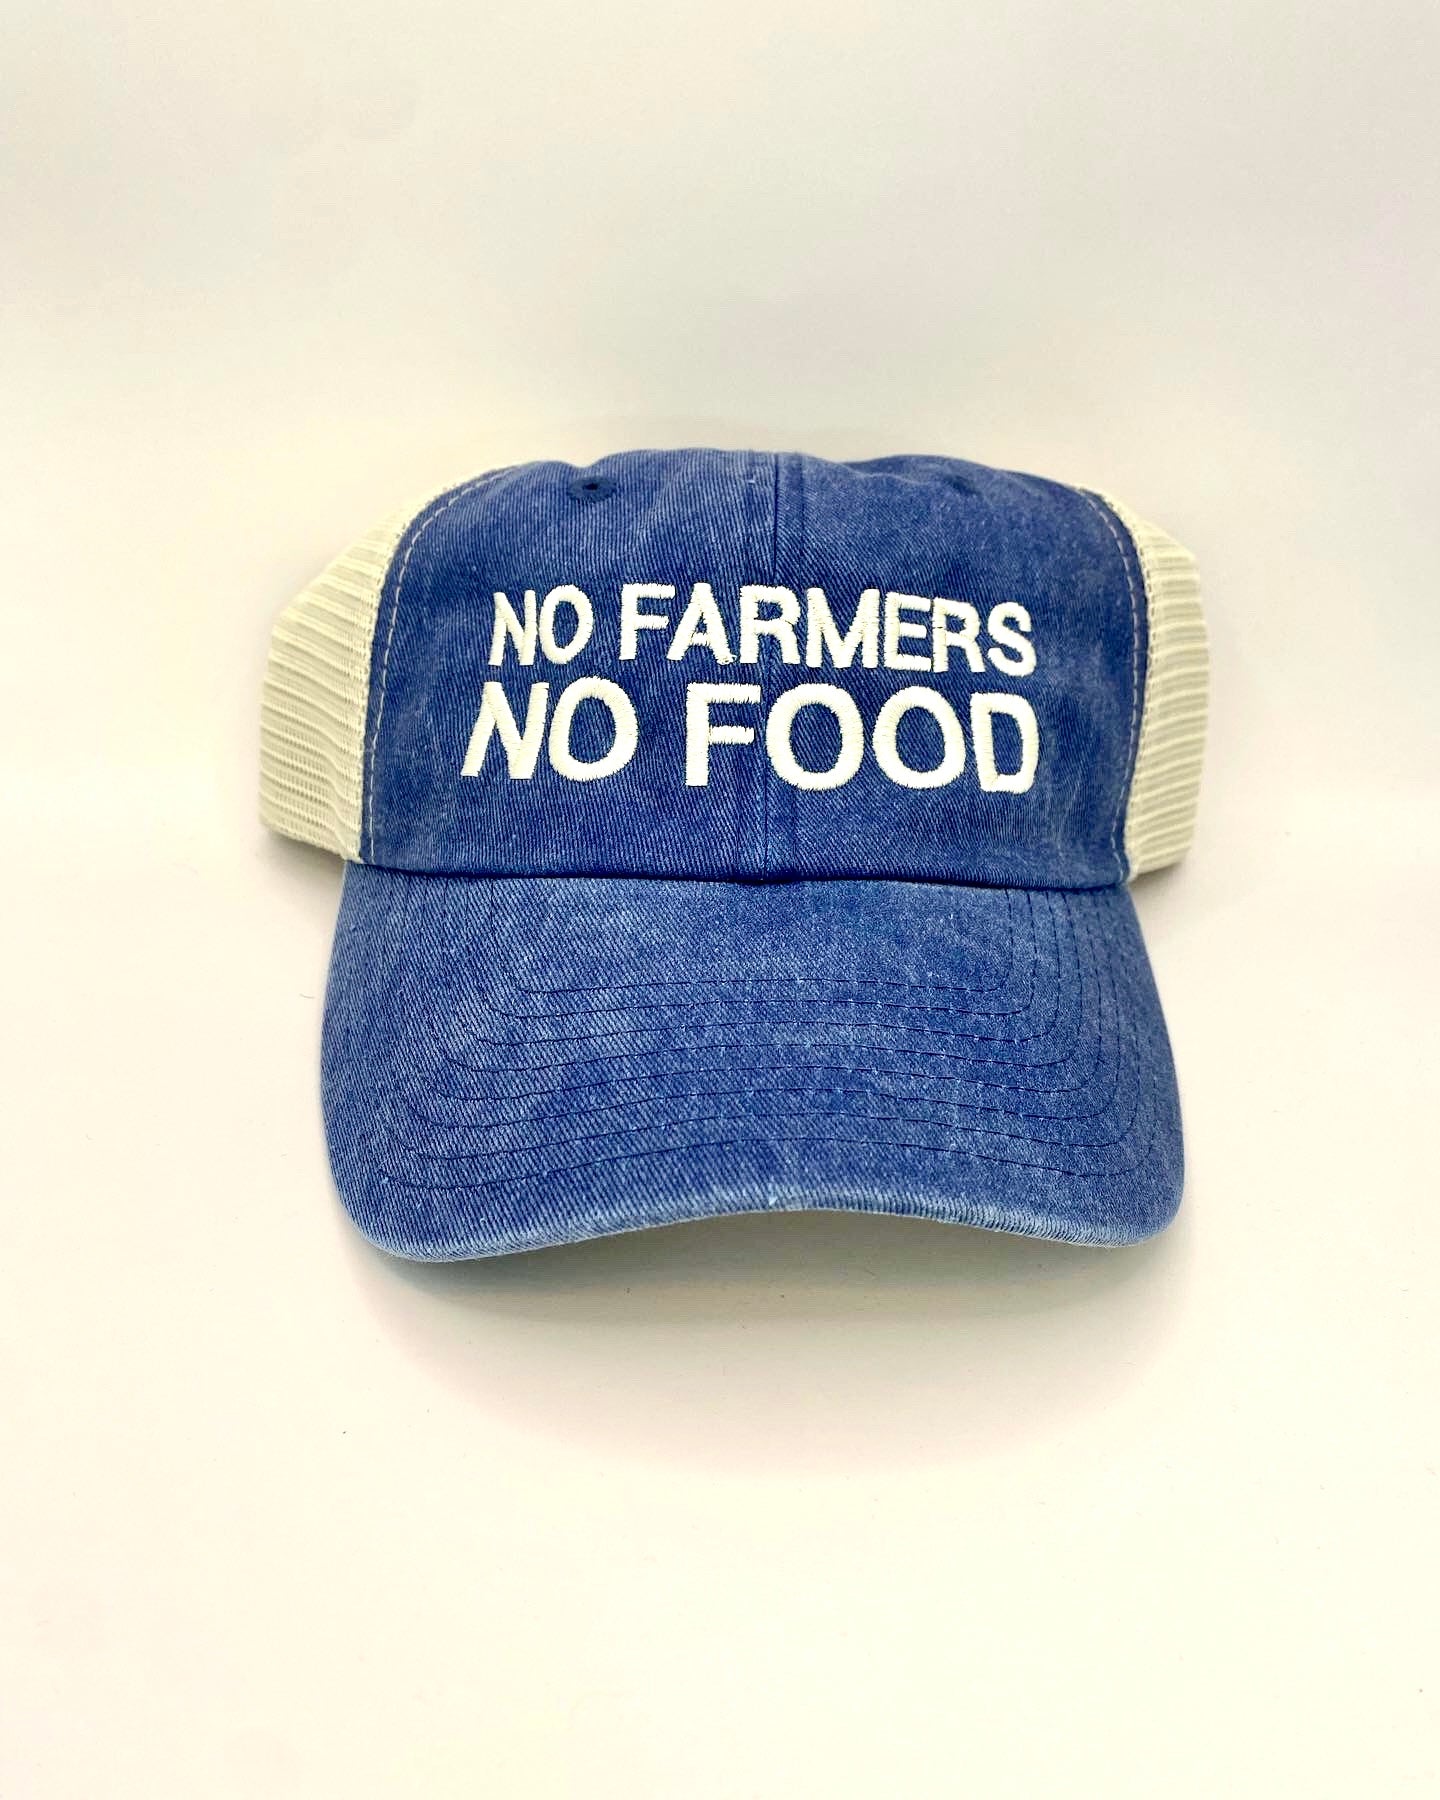 We support our farmers - no farmer, no food